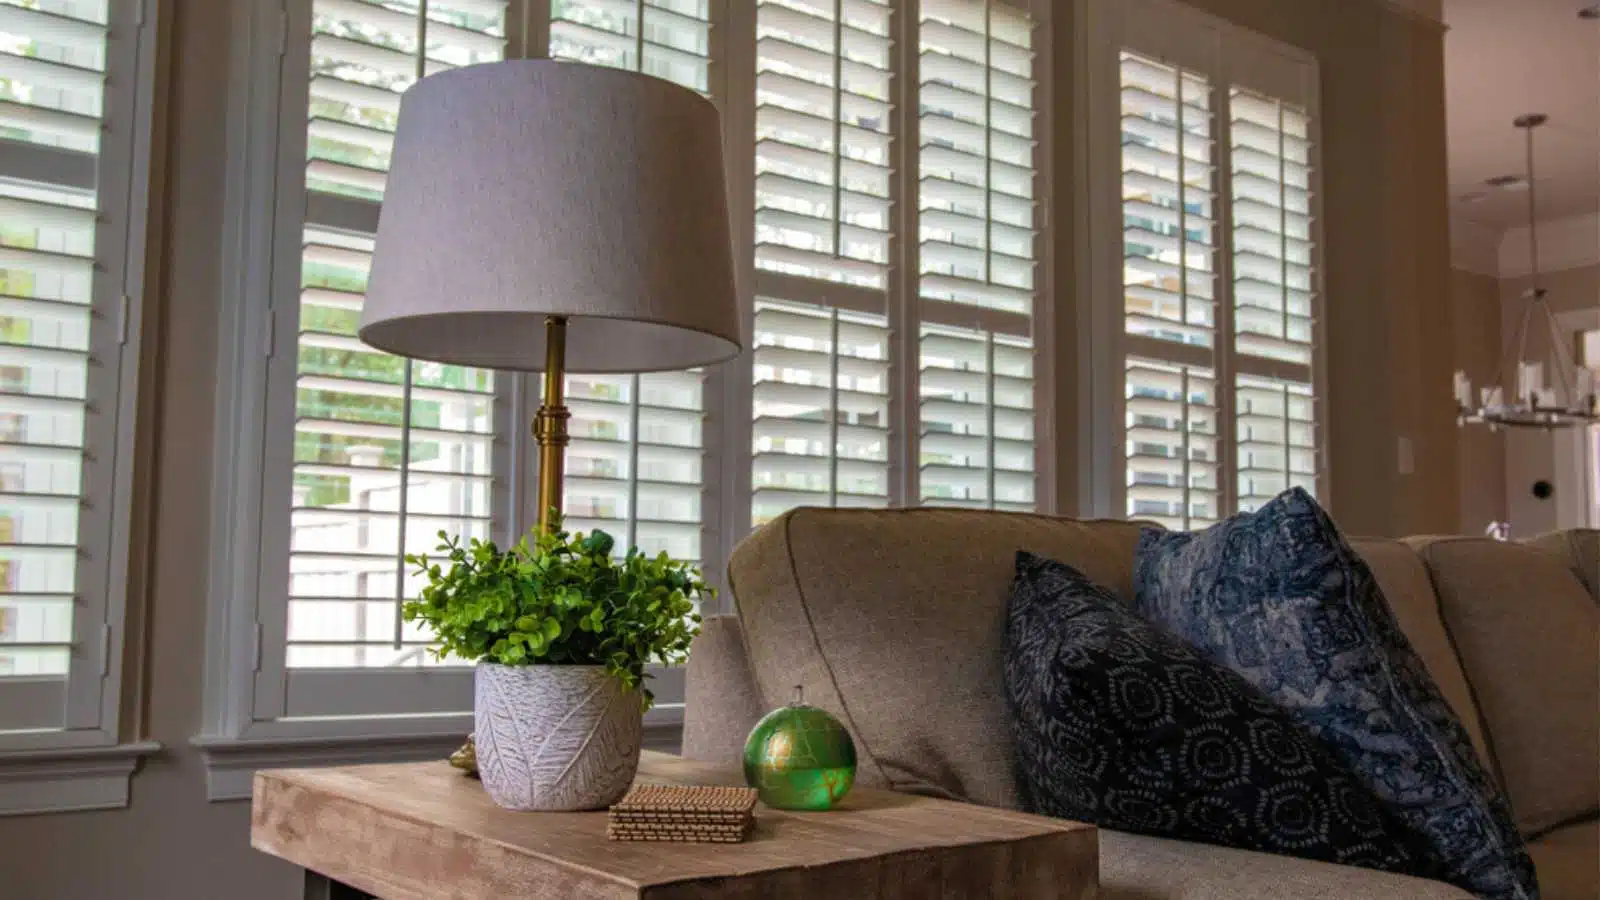 Shutters and upholstered furniture